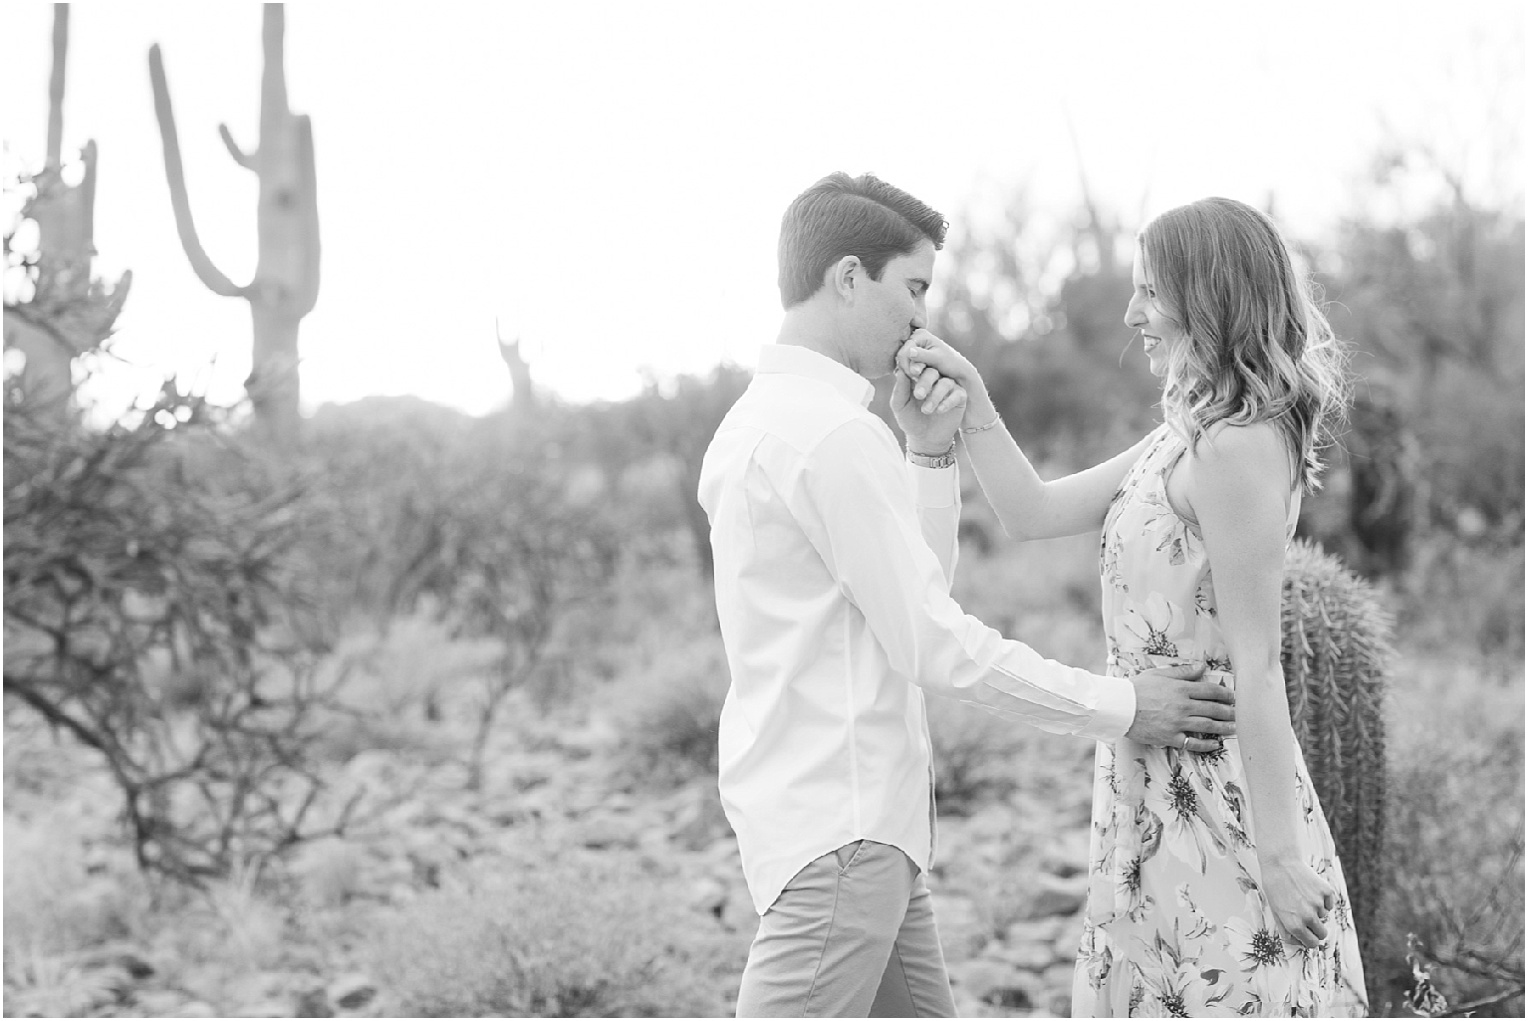 Engagement Pictures in Tucson Arizona Tucson Photographer Christa + Robby sunset engagement session